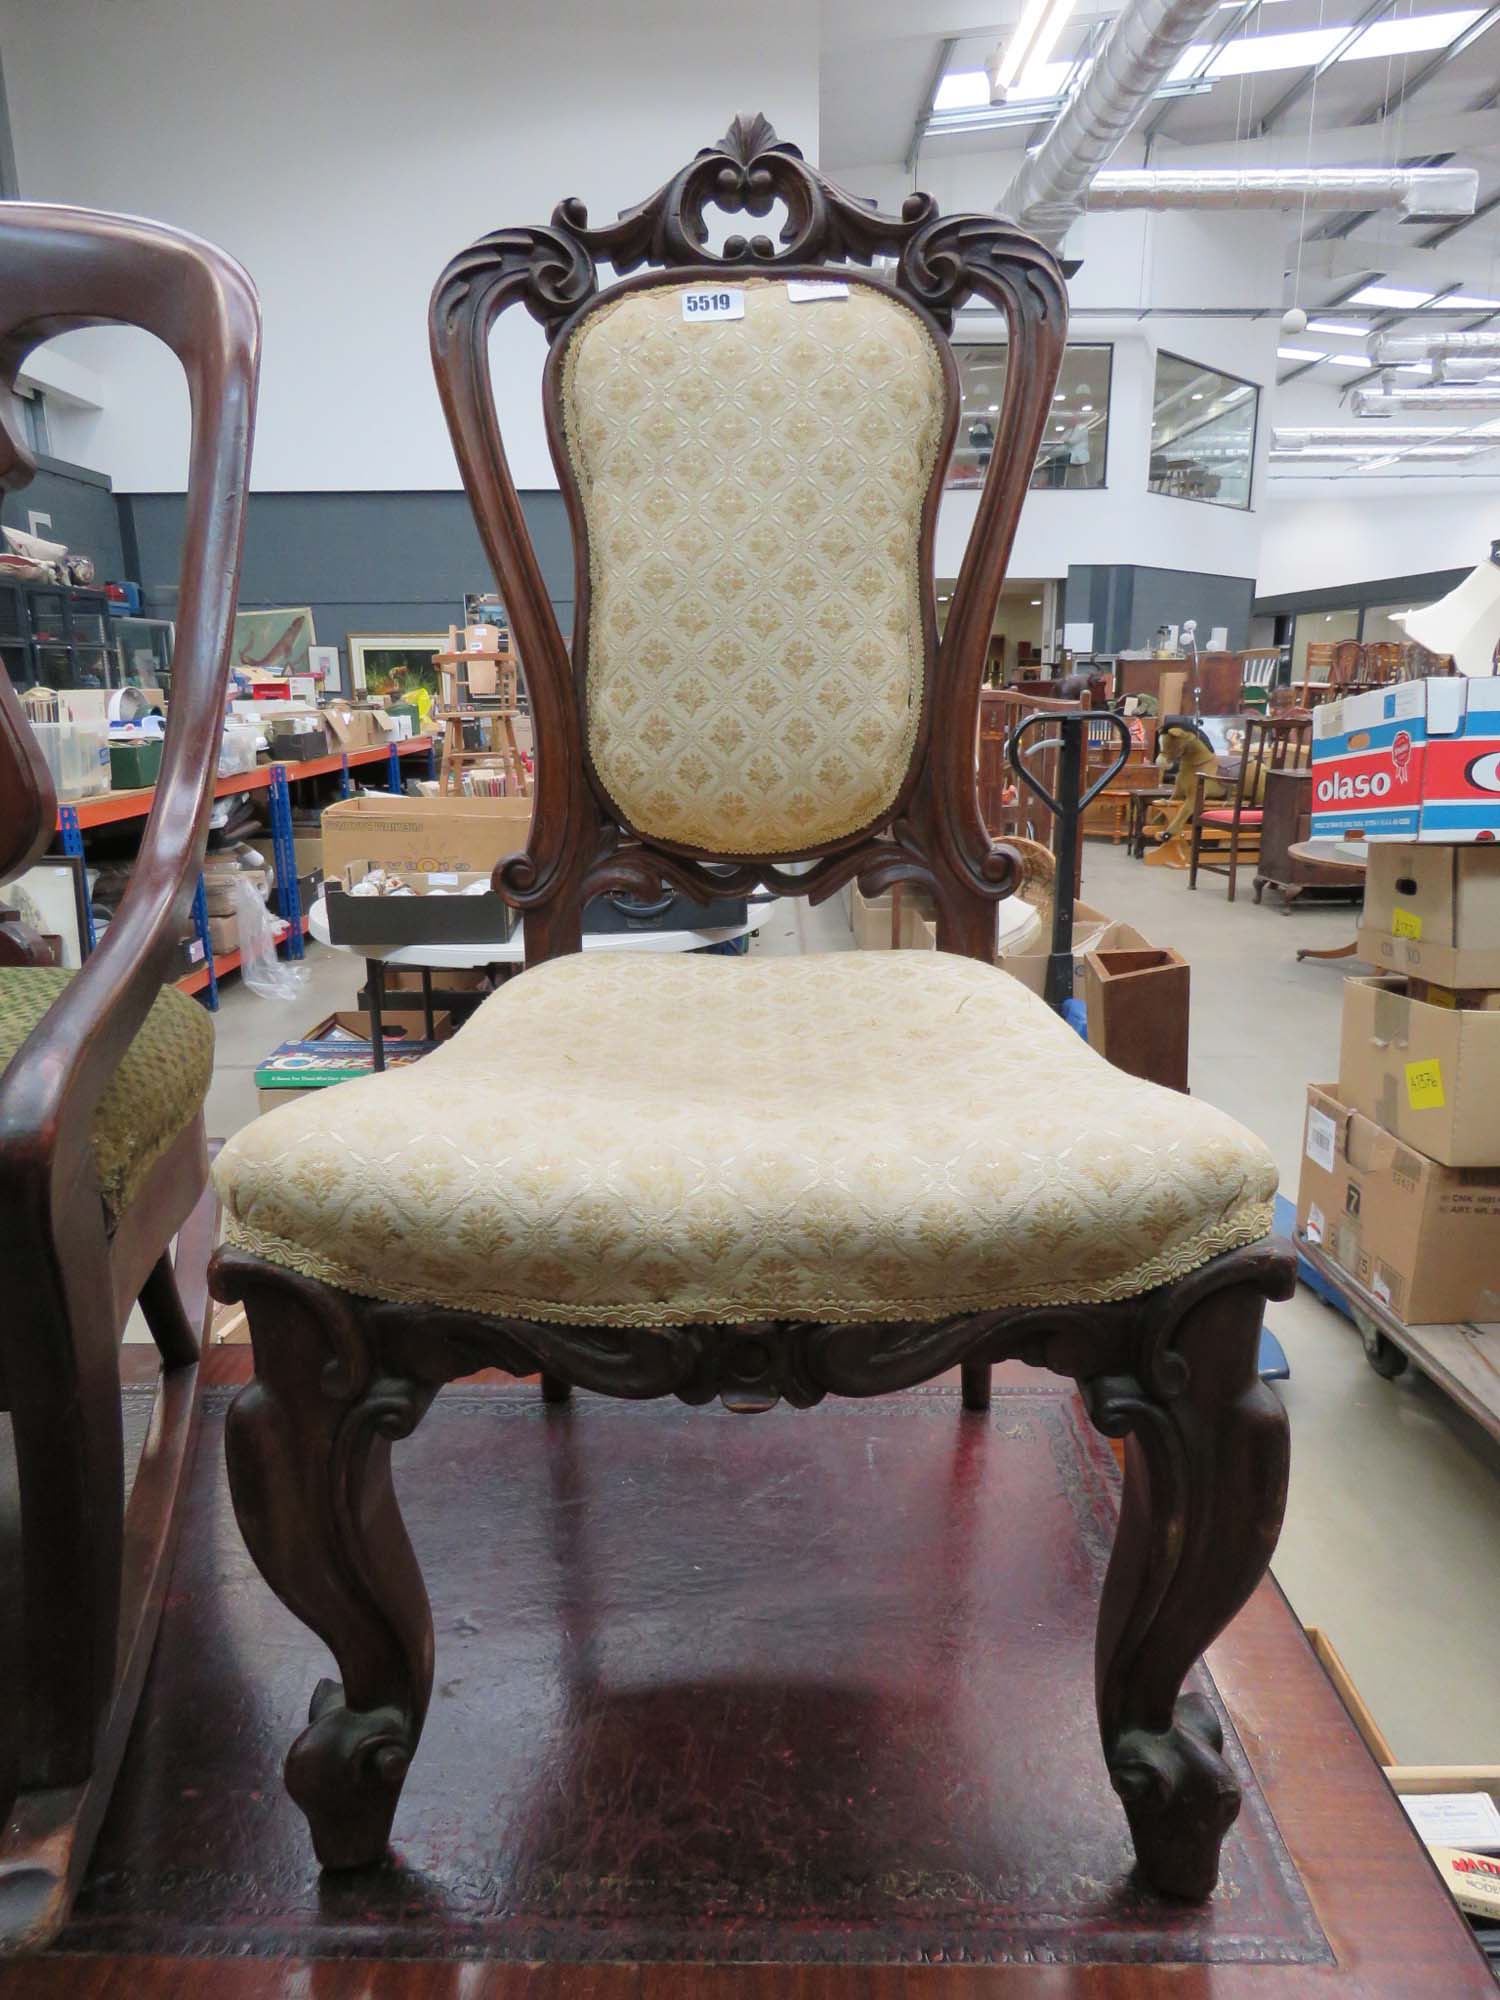 Carved wooden Edwardian chair with upholstered seat and backrest